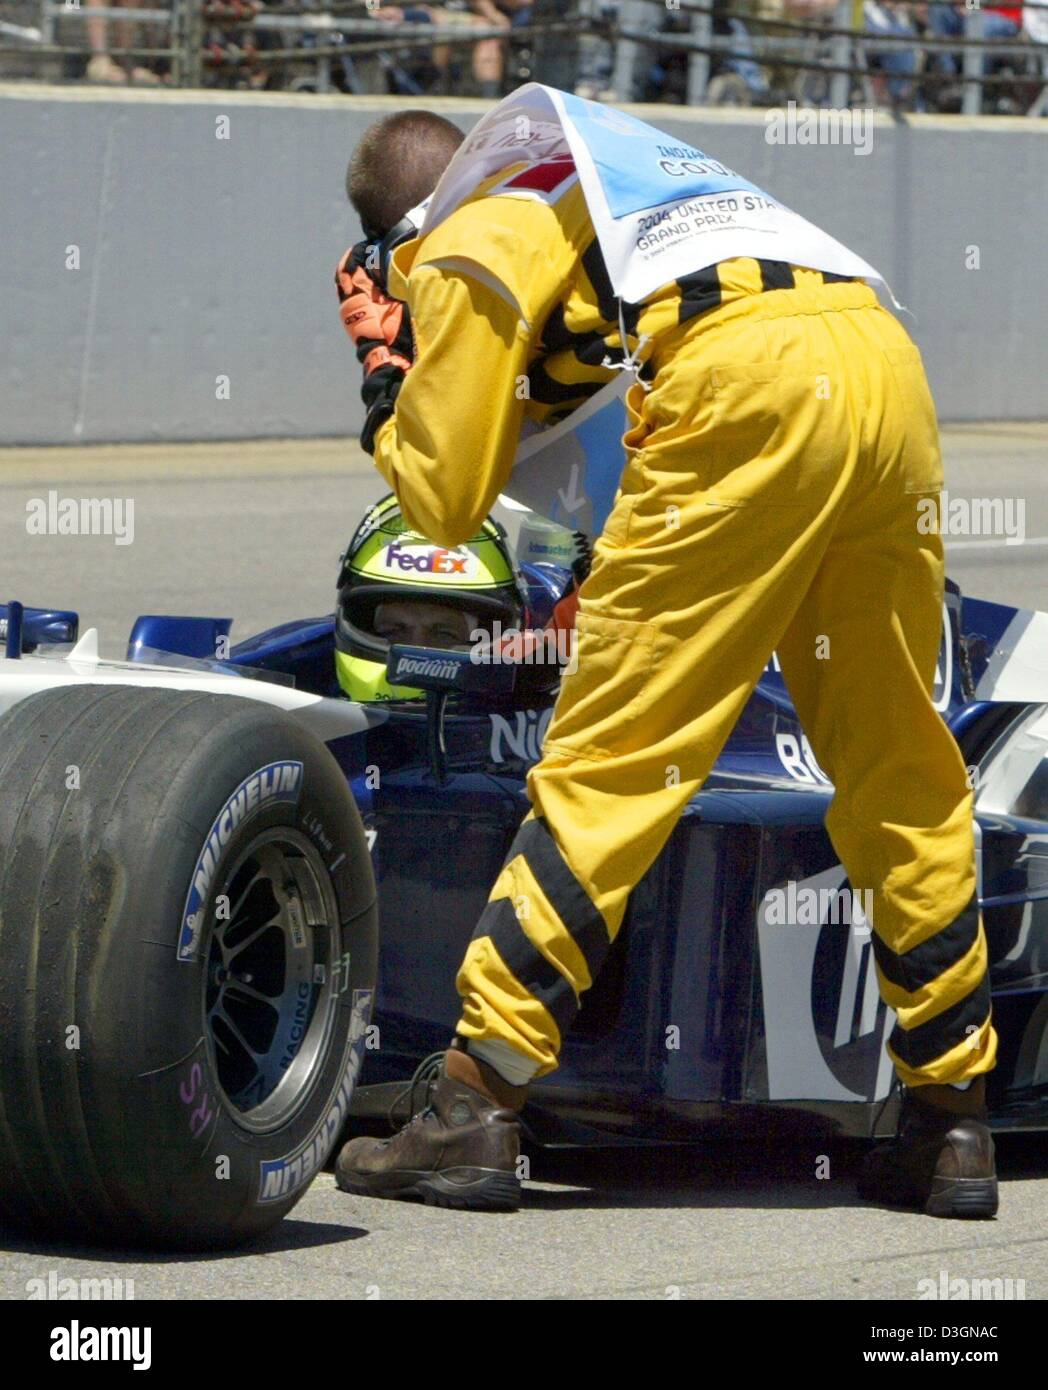 (dpa) - A member of the safety team speaks to German formula one pilot Ralf Schumacher of BMW-Williams as he sits in his racing car waiting for the arrival of the paramedics after his accident during the US Grand Prix on the racetrack in Indianapolis, USA, 20 June 2004. Ralf Schumach ran with a top speed of around 300 kilometres per hour into a barrier along the racetrack in the te Stock Photo